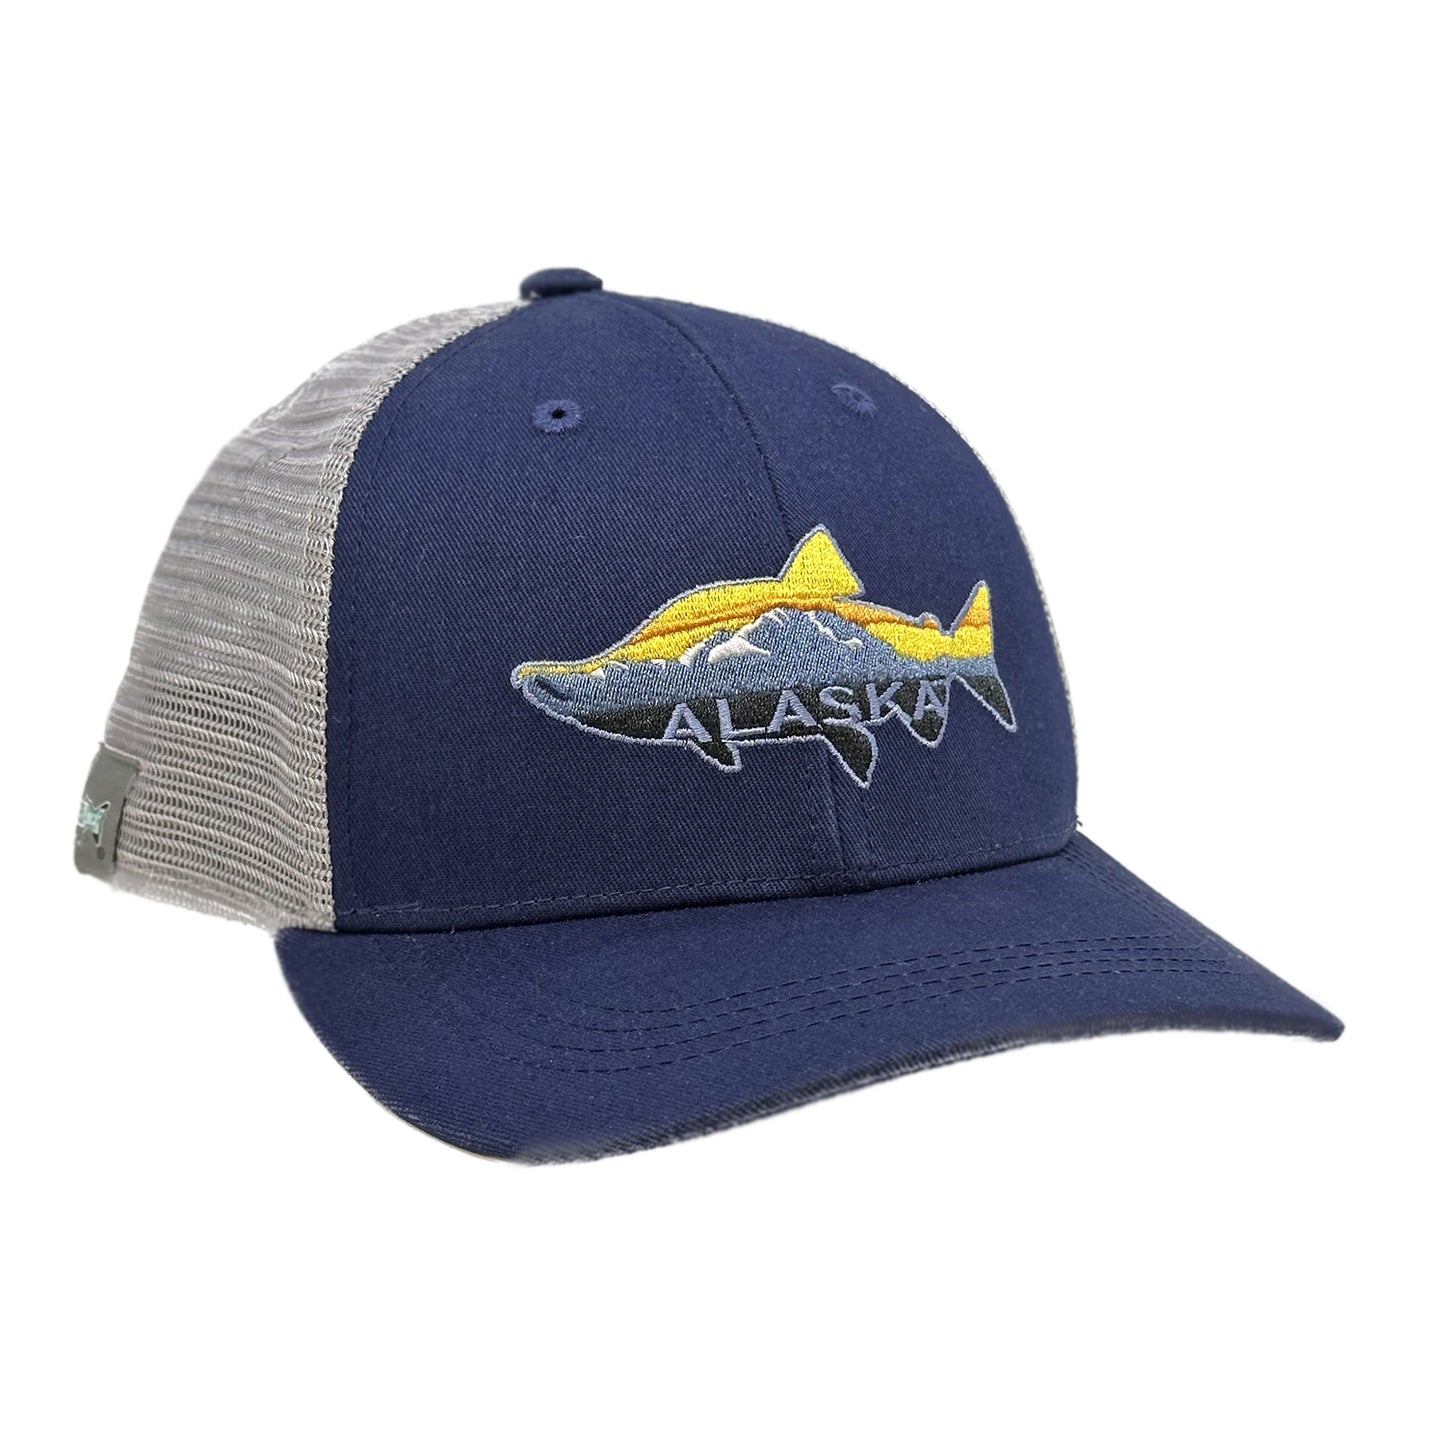 Navy hat with grey mesh bag with a Sockeye salmon shaped patch with a mountain range within